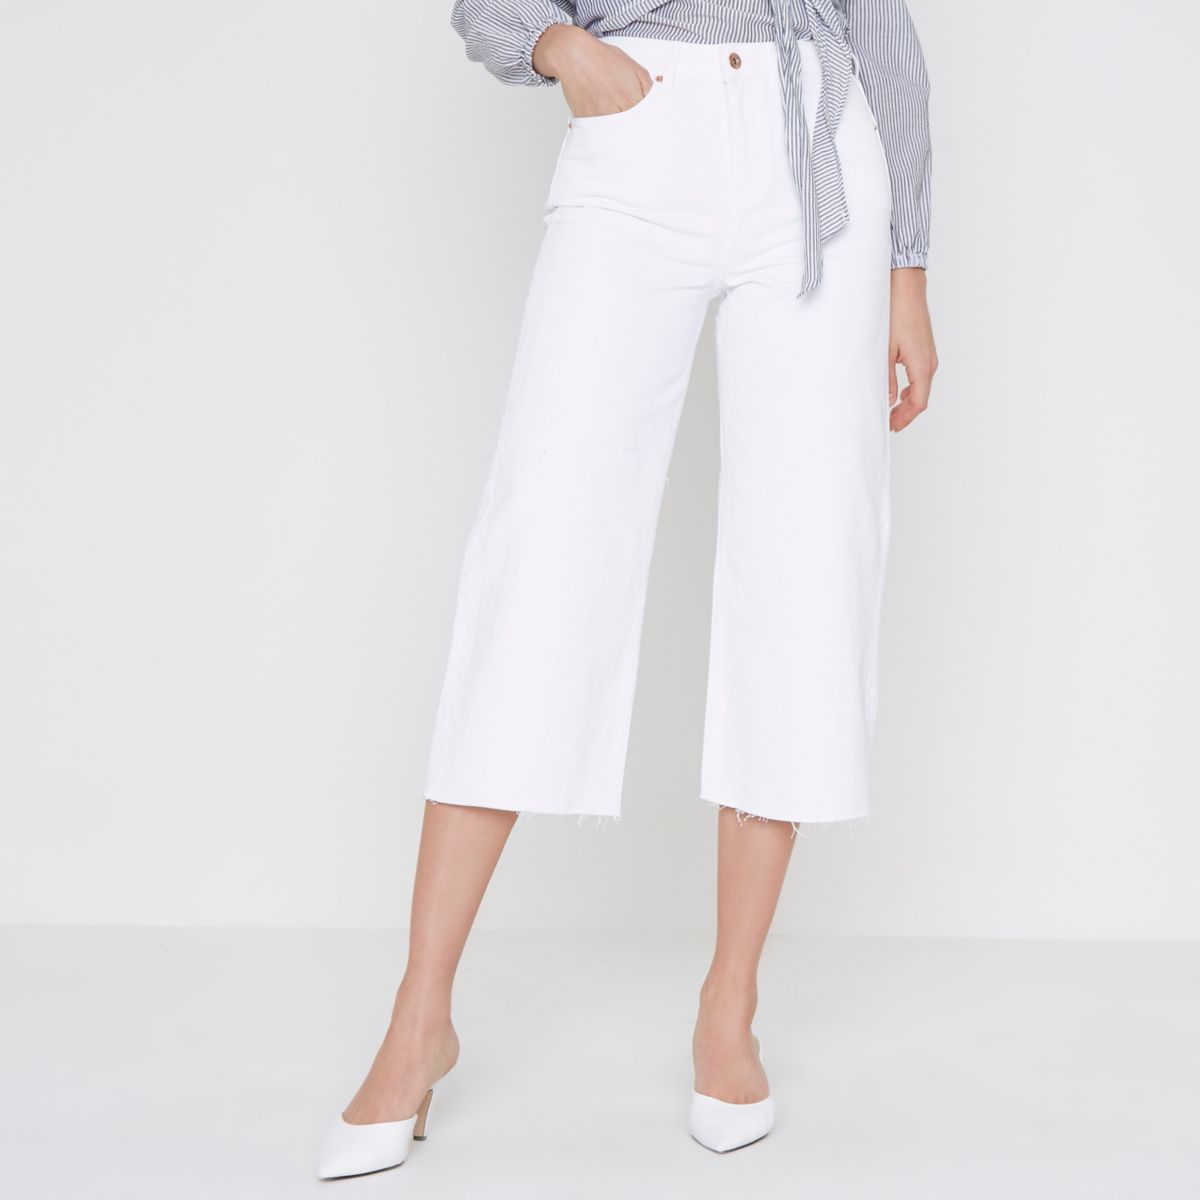 Womens wide leg cropped jeans